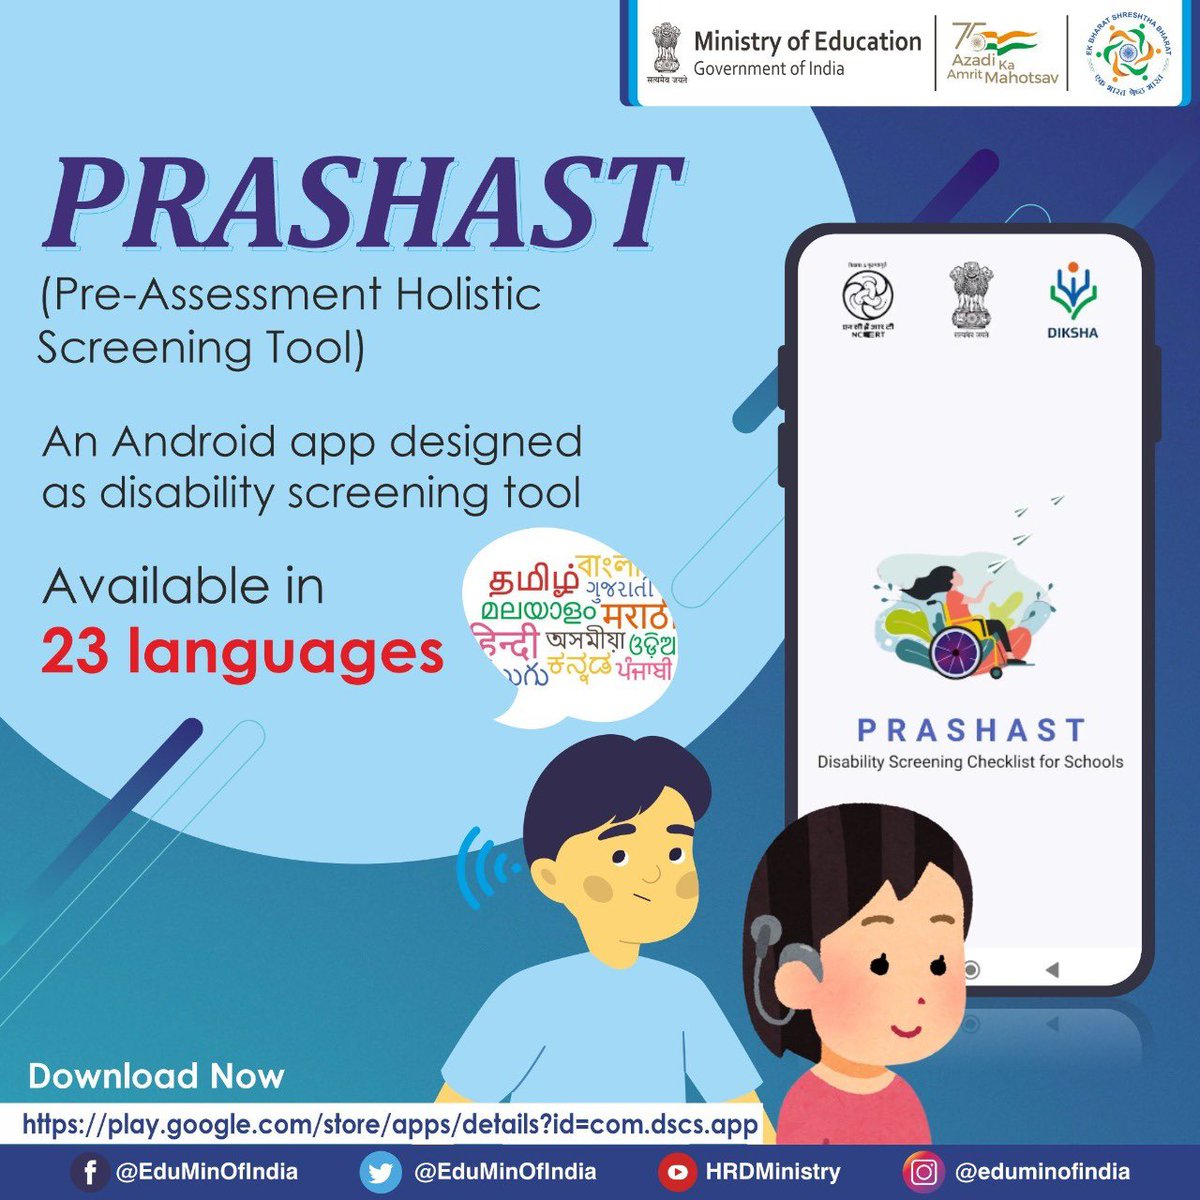 In an effort to bridge language barriers, #PRASHAST App is now available in 23 languages (22 languages included in the VIII Schedule of our Constitution) for the easy access of teachers, special educators and school heads. Download here: play.google.com/store/apps/det…